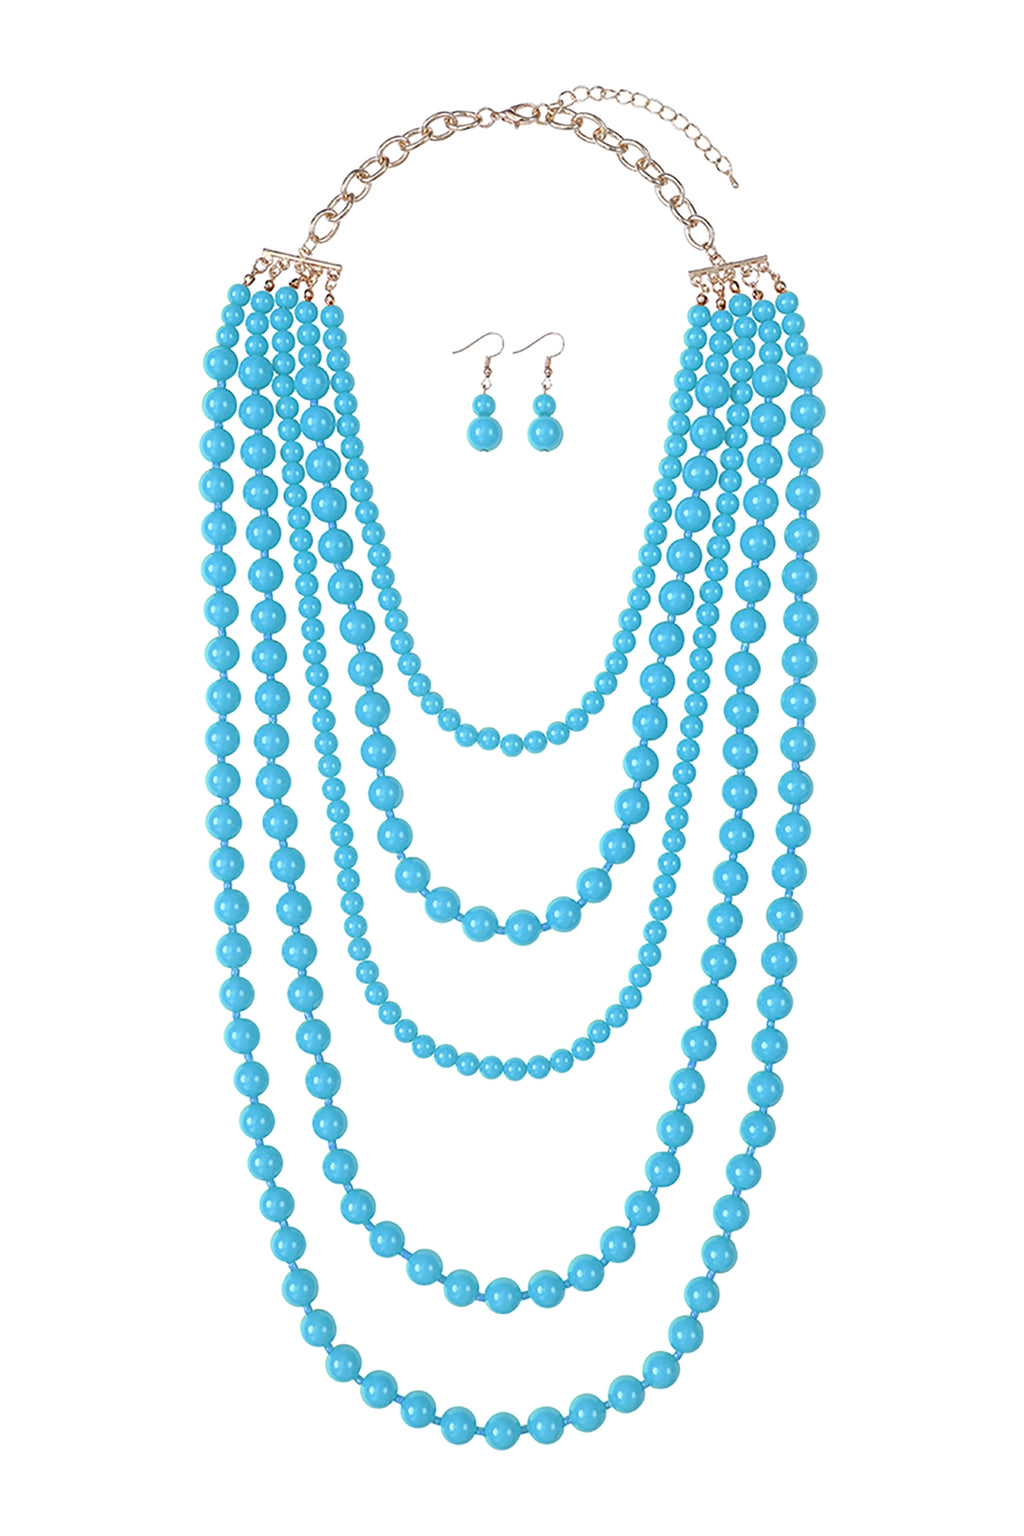 Multi Layered Beads Necklace and Earrings Set Turquoise - Pack of 6